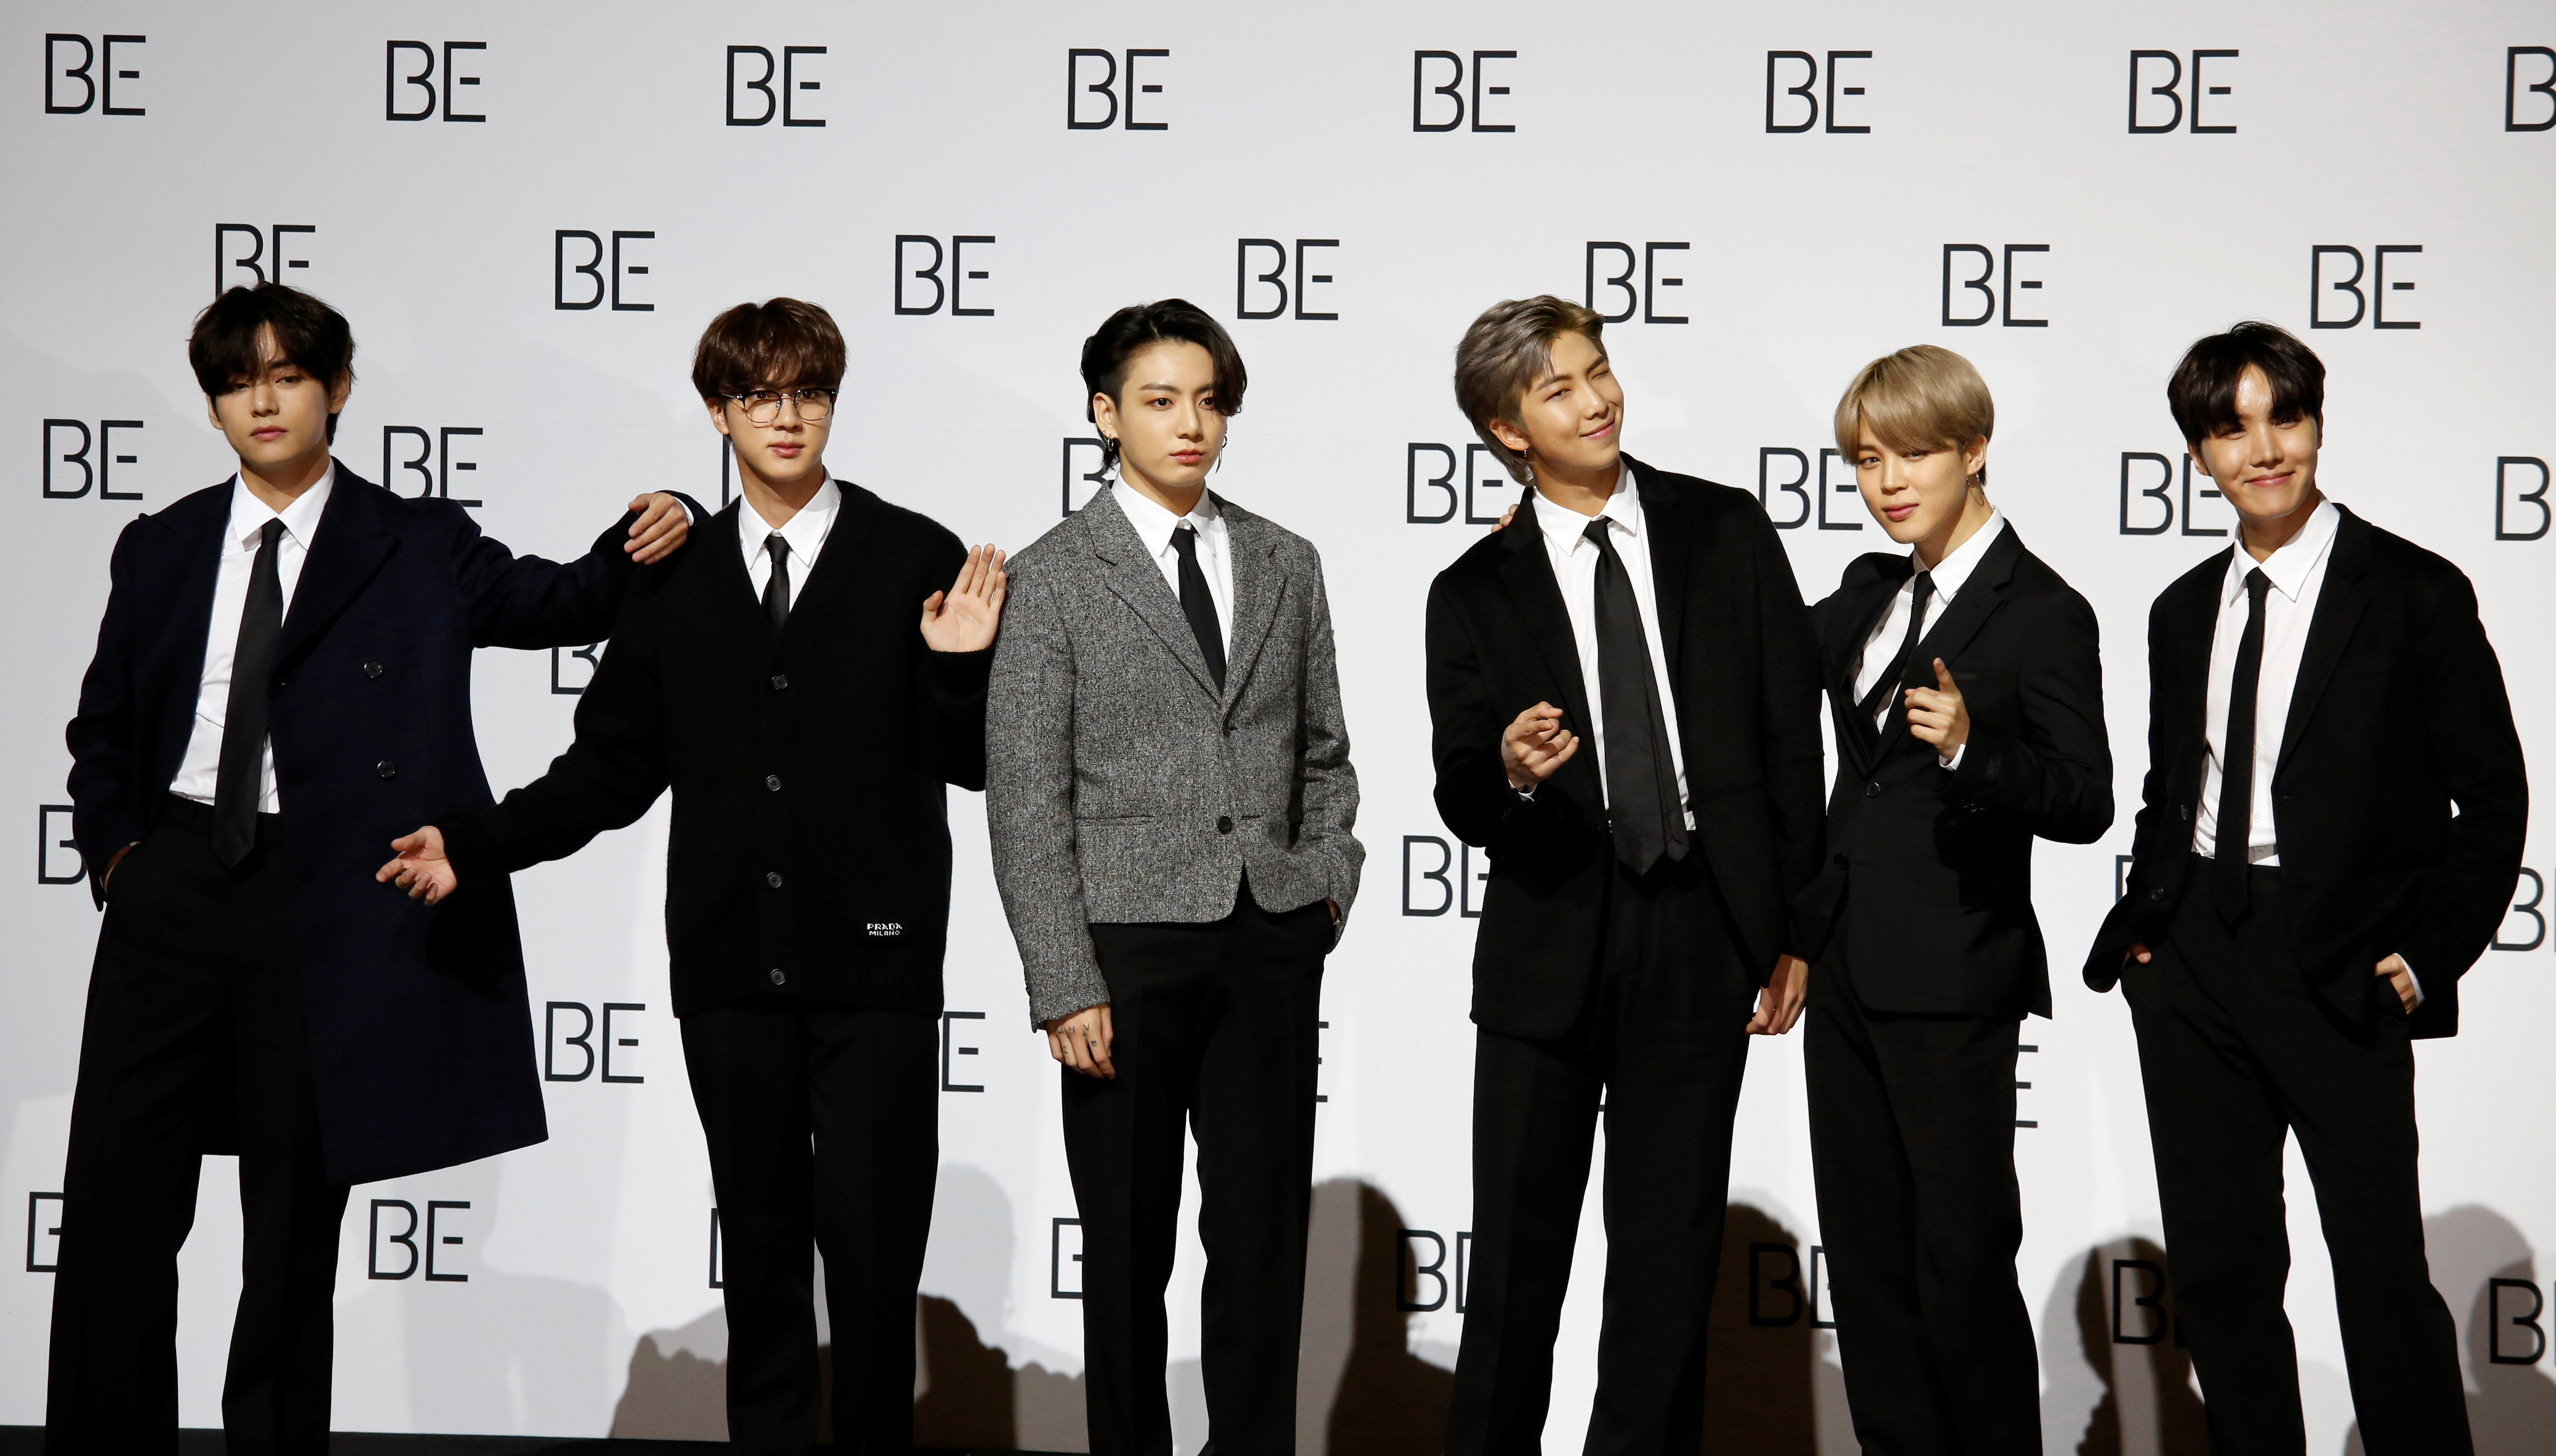 Members of K-pop boy band BTS pose for photographs during a news conference promoting their new album "BE(Deluxe Edition)" in Seoul, South Korea, November 20, 2020.    REUTERS/Heo Ran